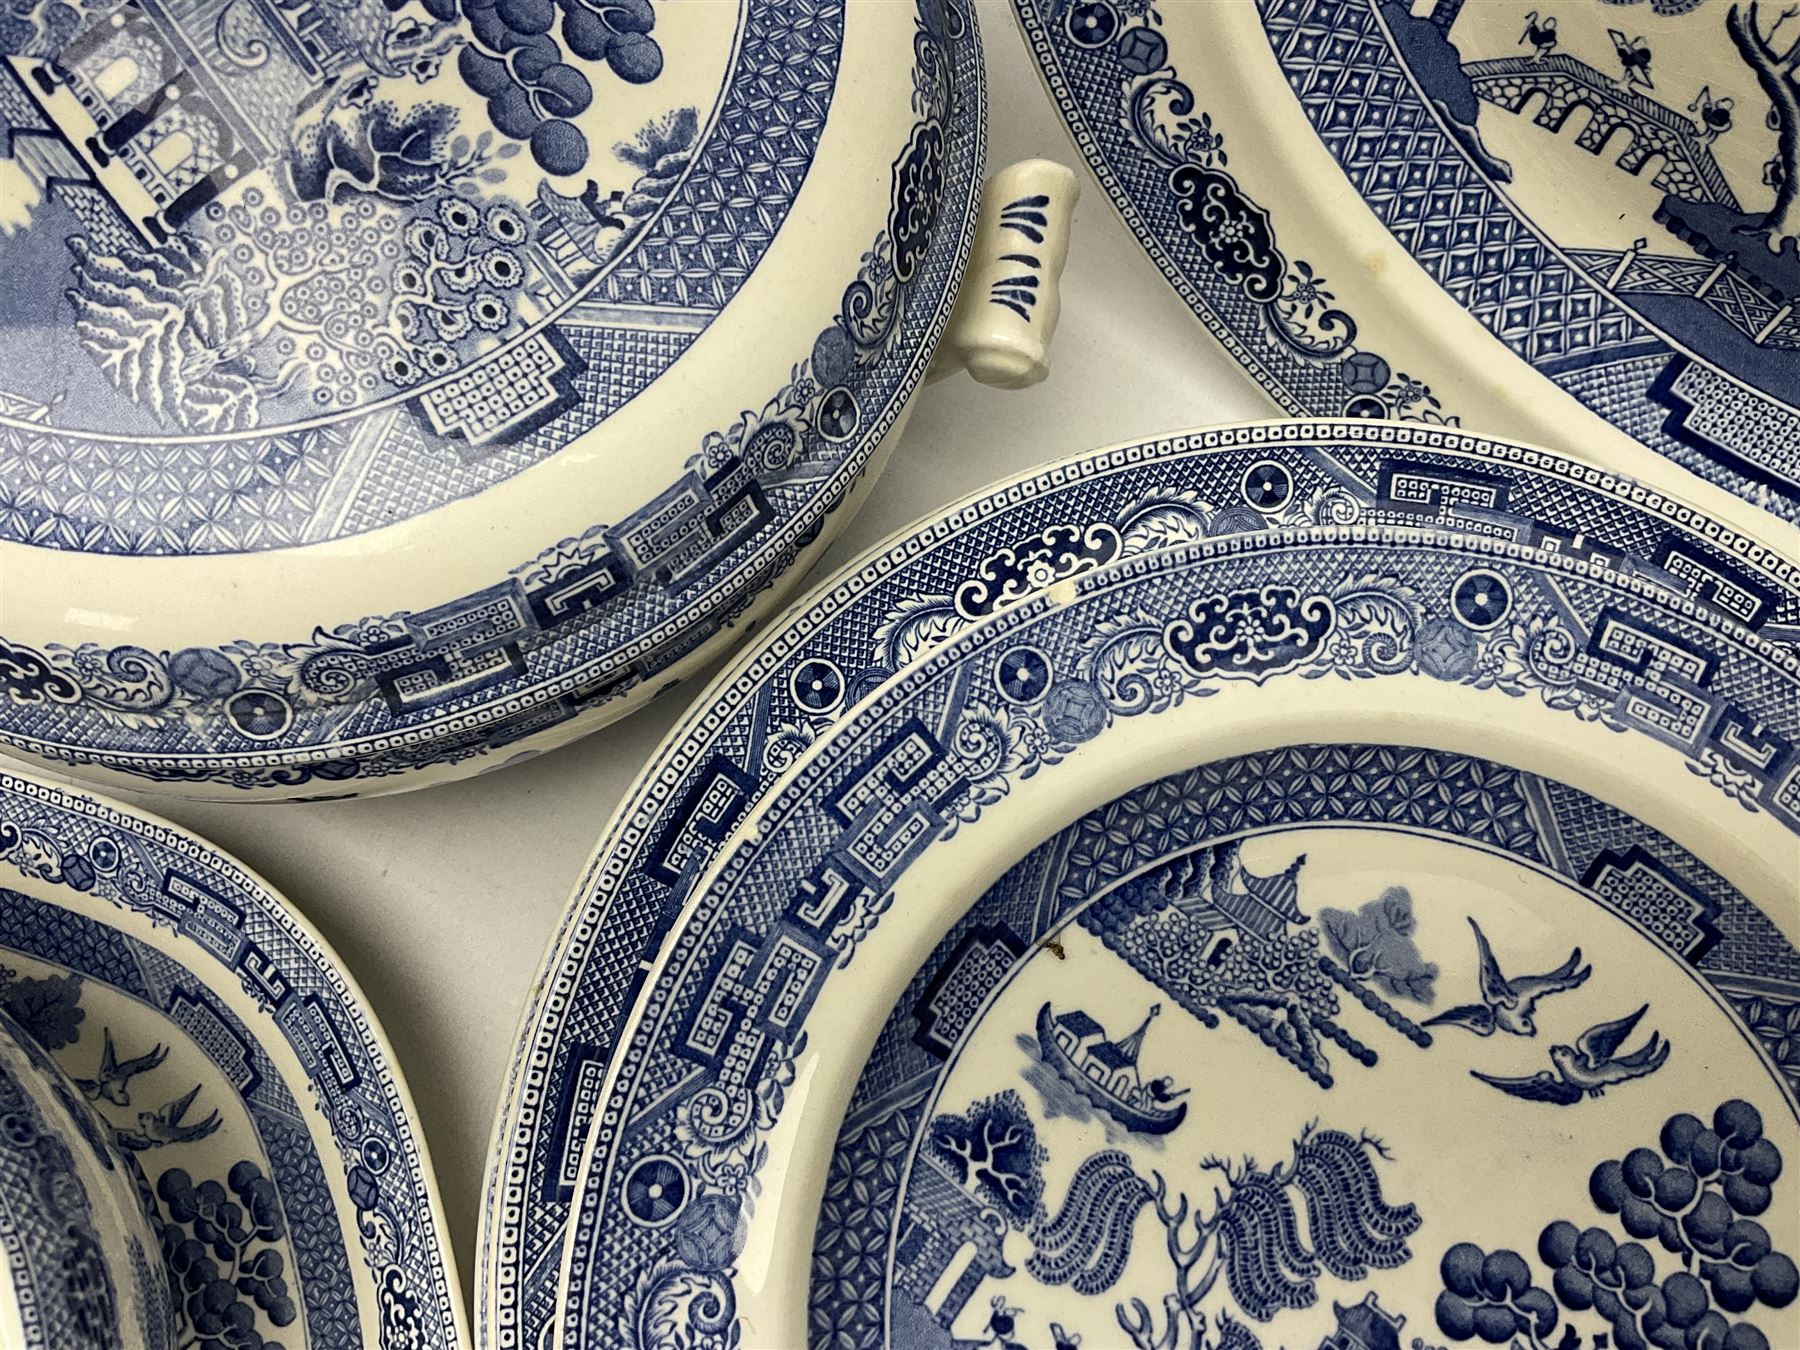 Wedgwood of Etruria blue and white willow patterned tea and dinner wares - Image 6 of 6